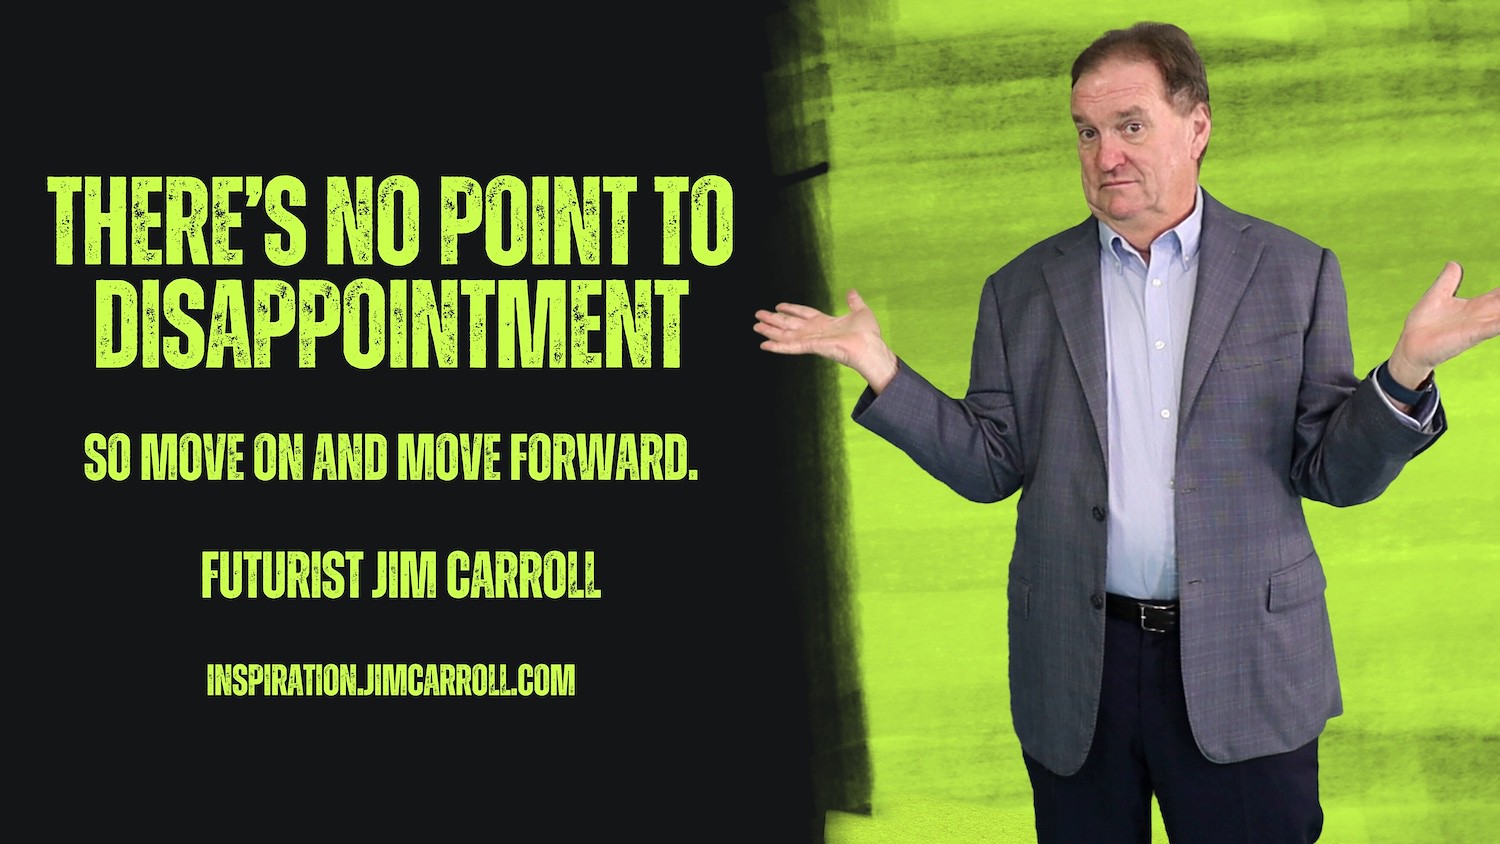 "There's no point to disappointment - so move on and move forward." - Futurist Jim Carroll